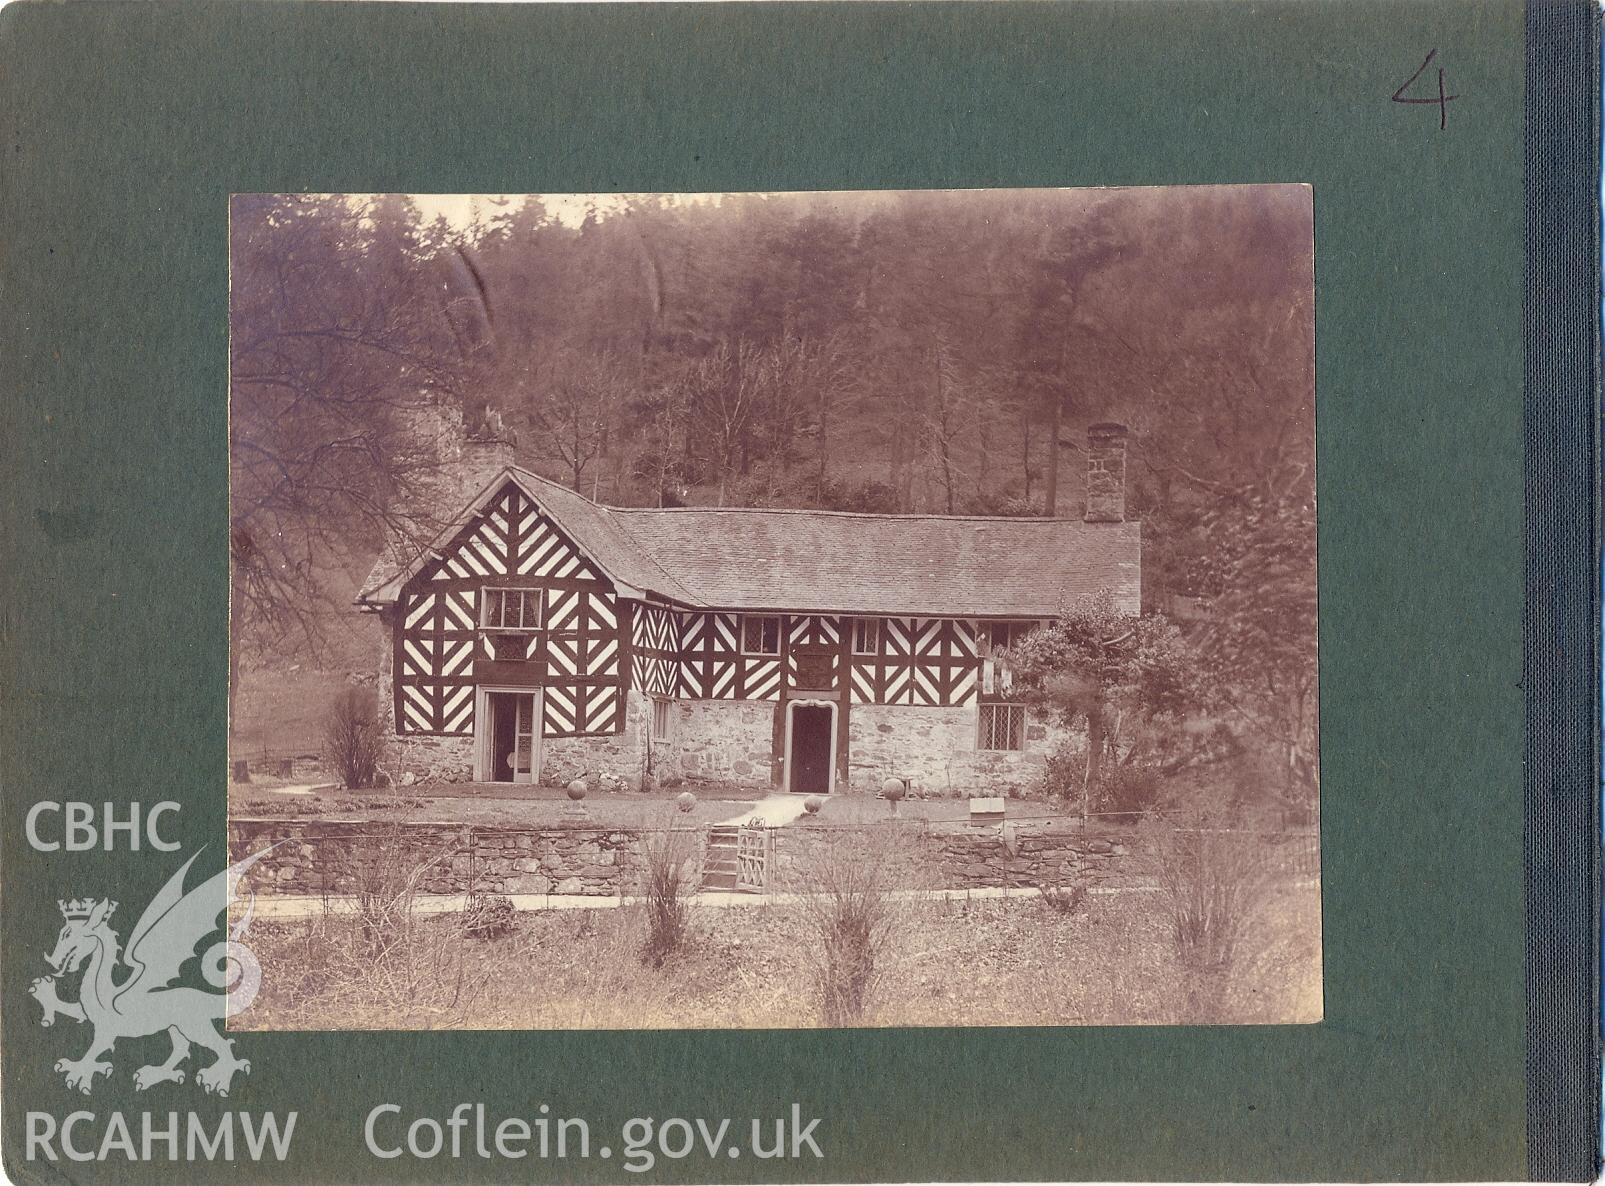 Digital copy of a page from a family album inherited by David Redhead, featuring main elevation view of Plas Uchaf showing coat of arms, dated 1908-1911.